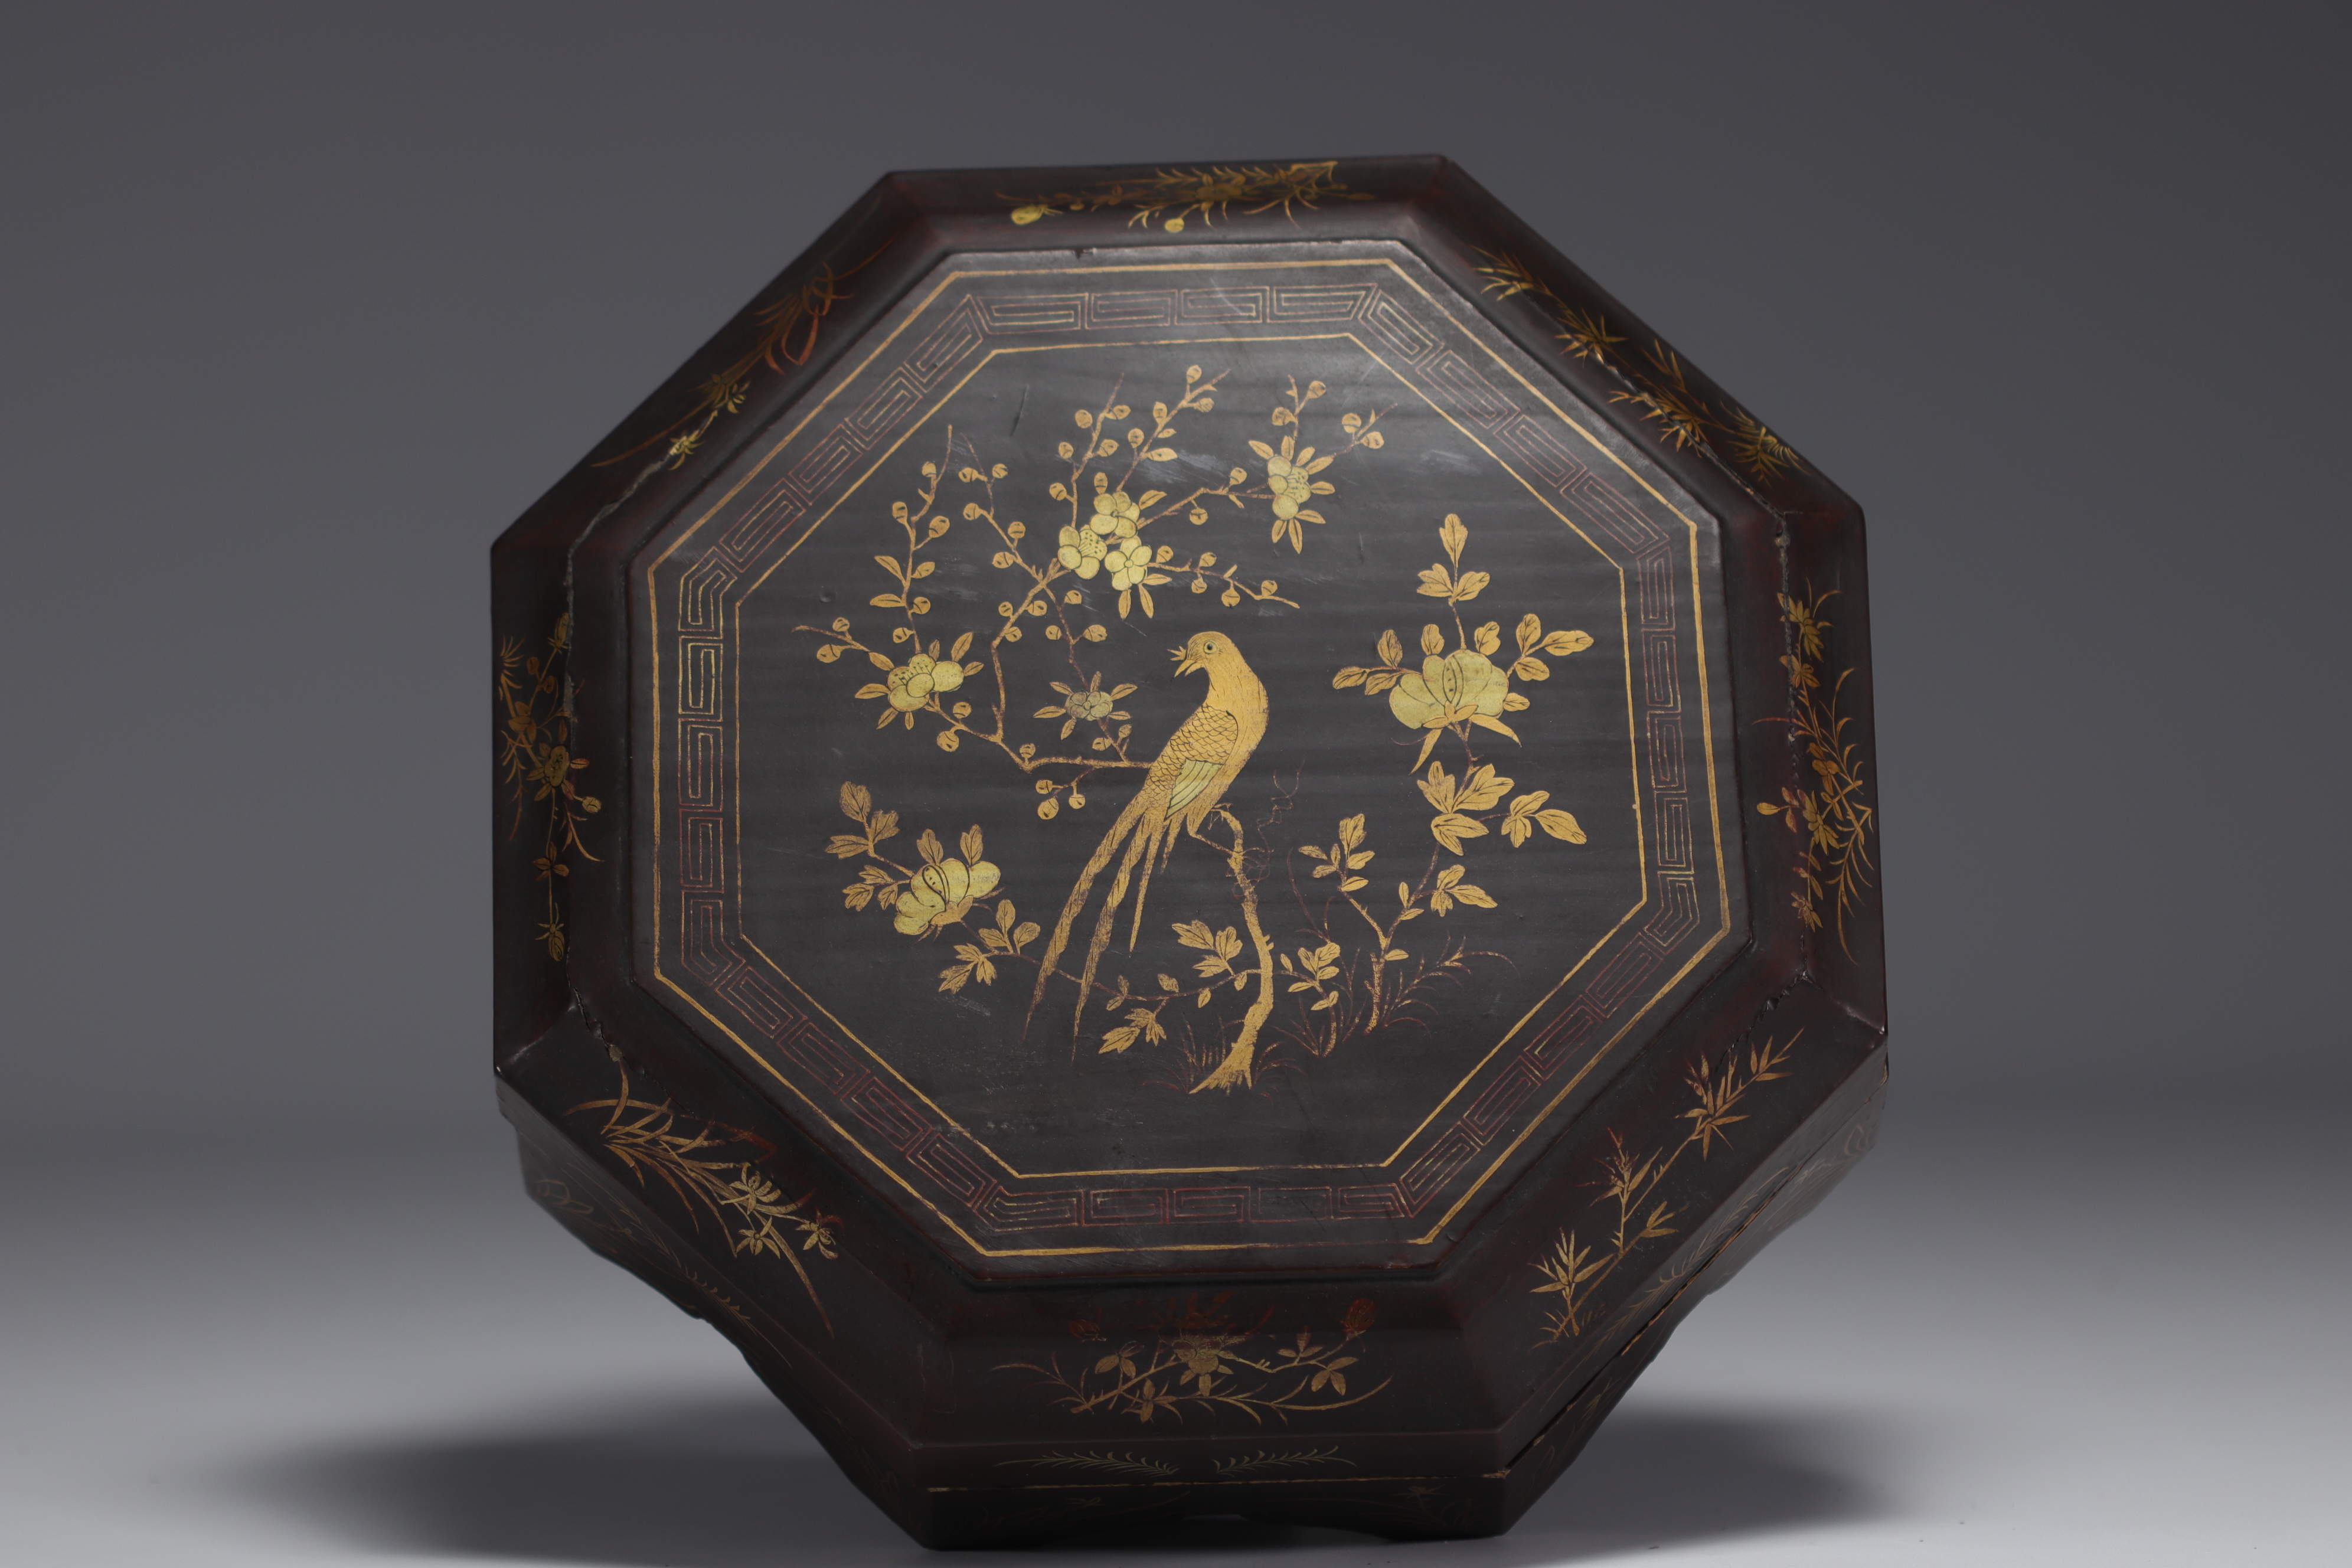 China - Set of cloisonne enamel dishes with floral and bird decor in original lacquer box, 19th cent - Image 4 of 4